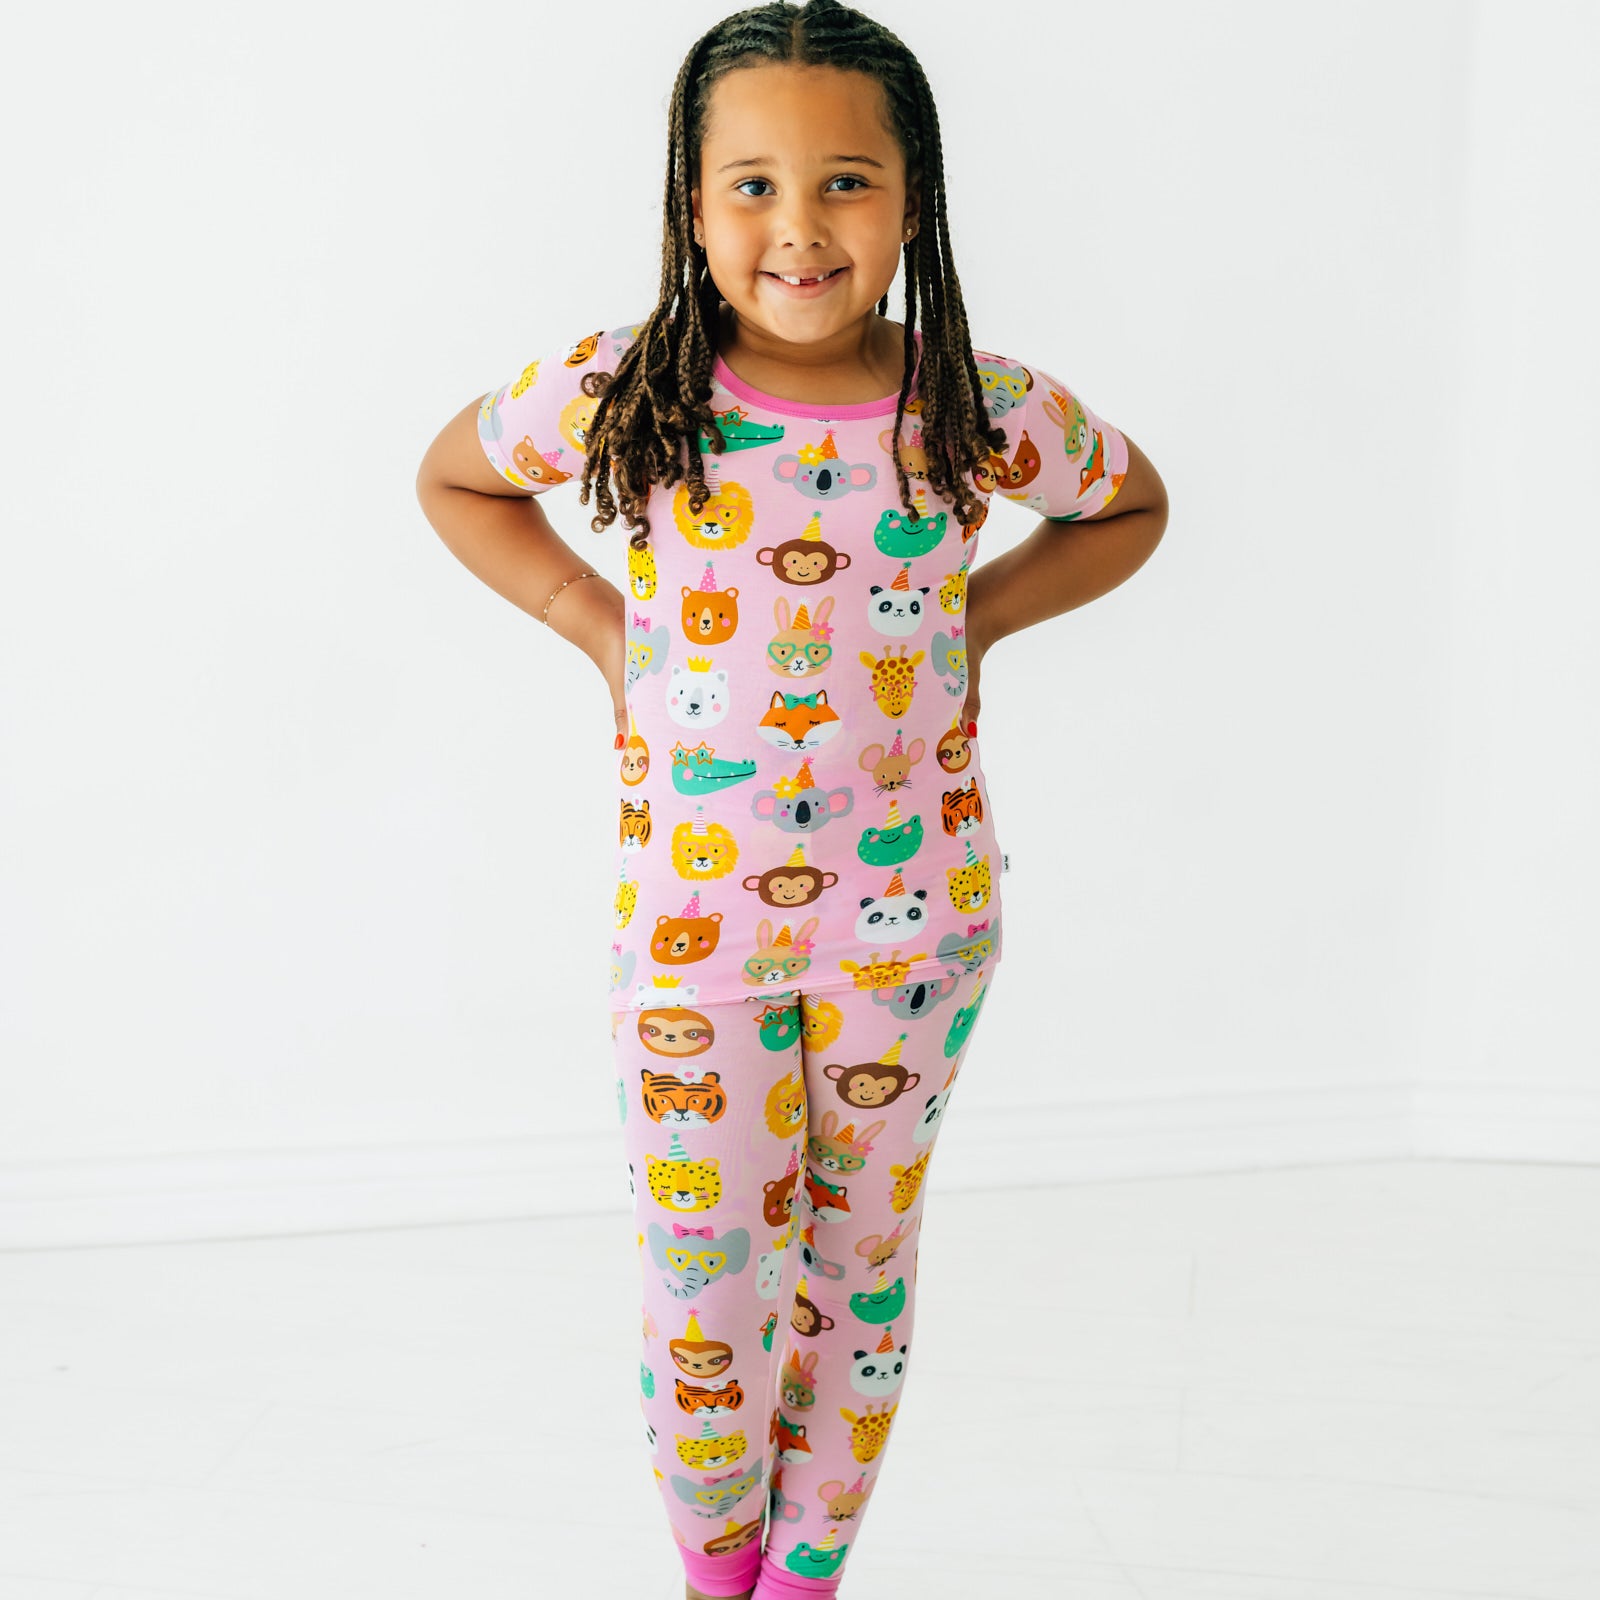 Child posing wearing Pink Party Pals two piece short sleeve pj set